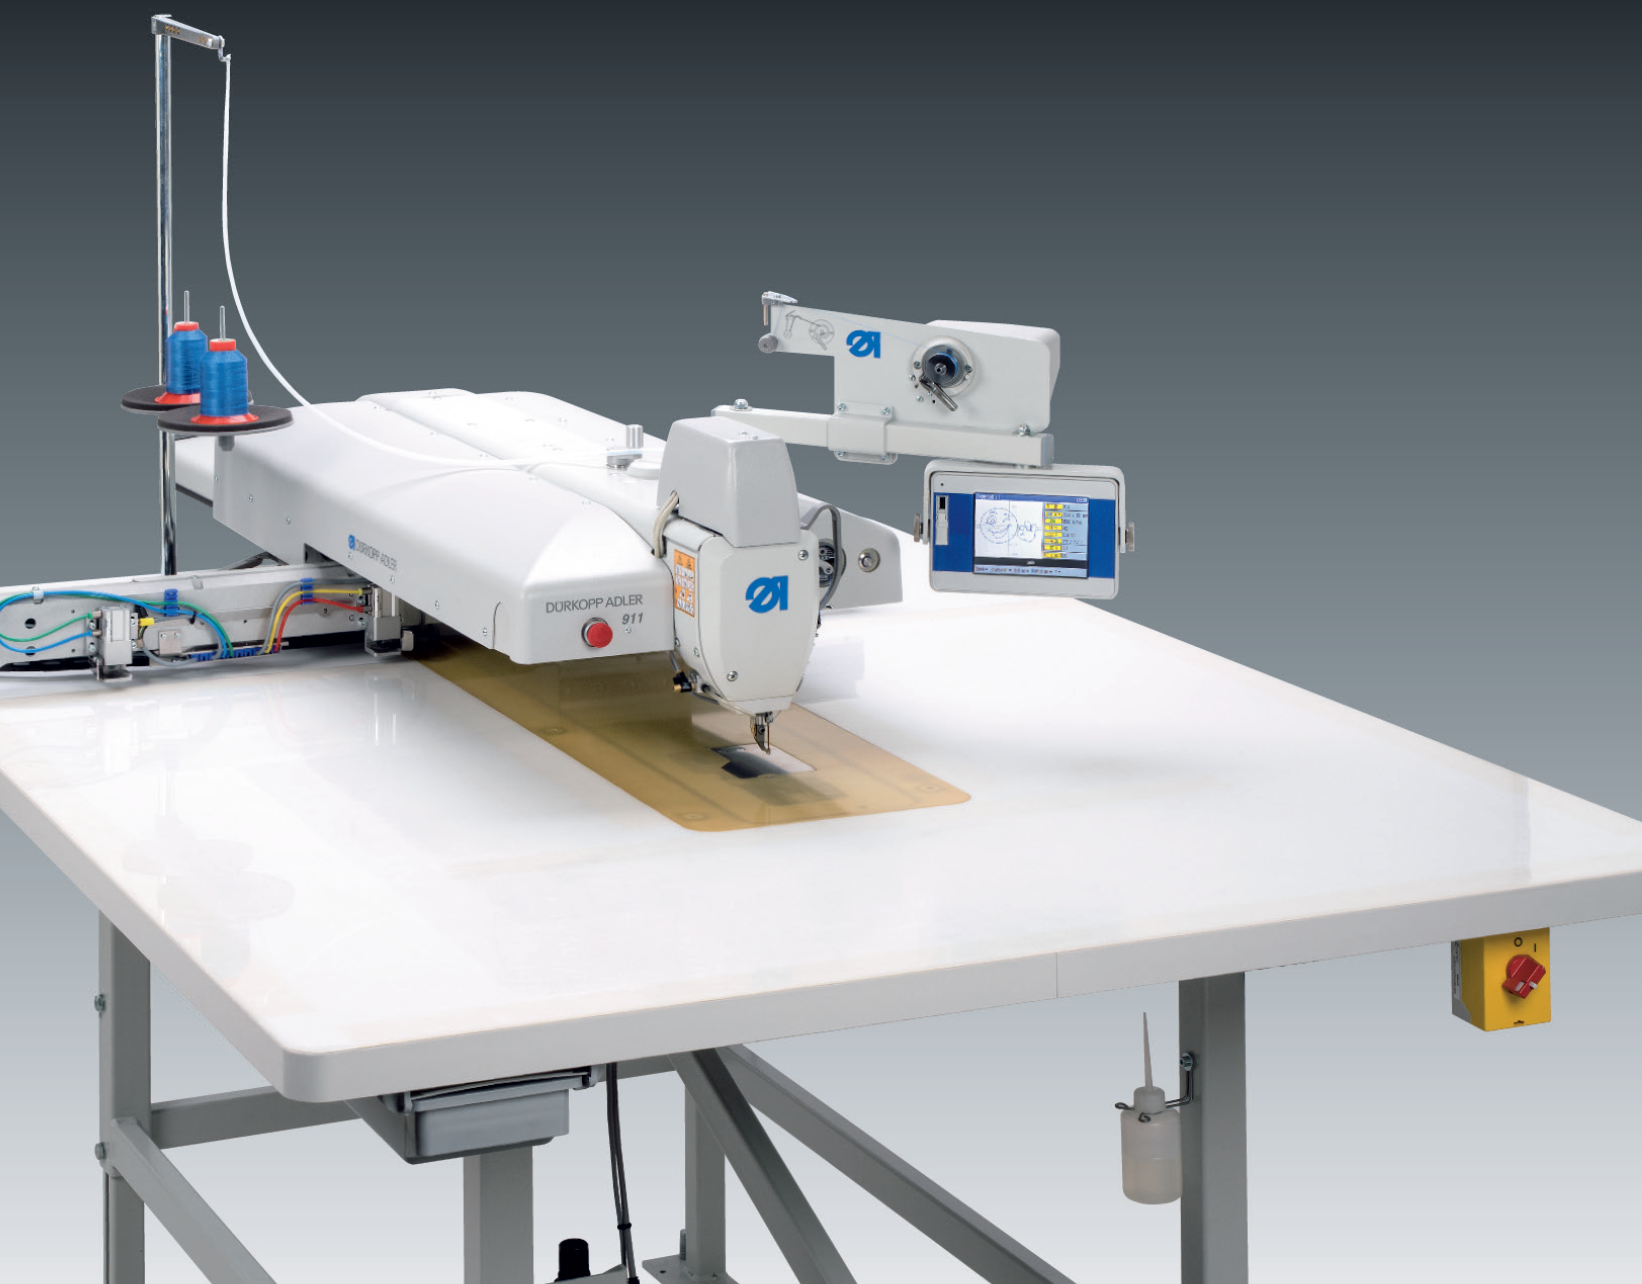 CNC-controlled sewing unit with clamping system for large-area appliqués – sewing field size max. 800 x 550 mm